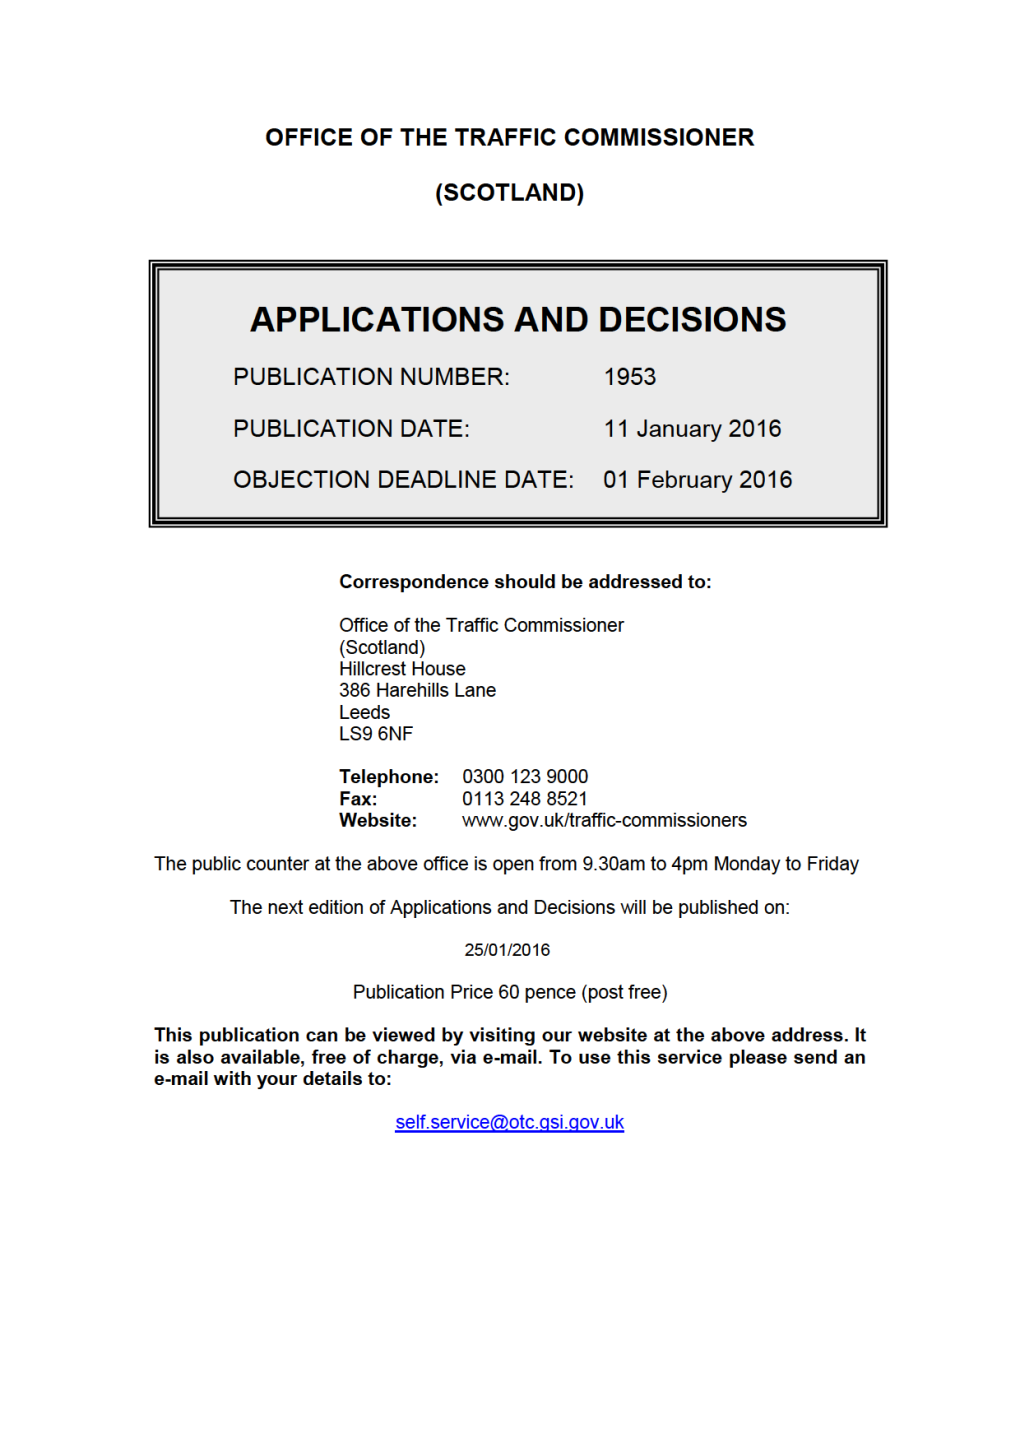 APPLICATIONS and DECISIONS 11 January 2016